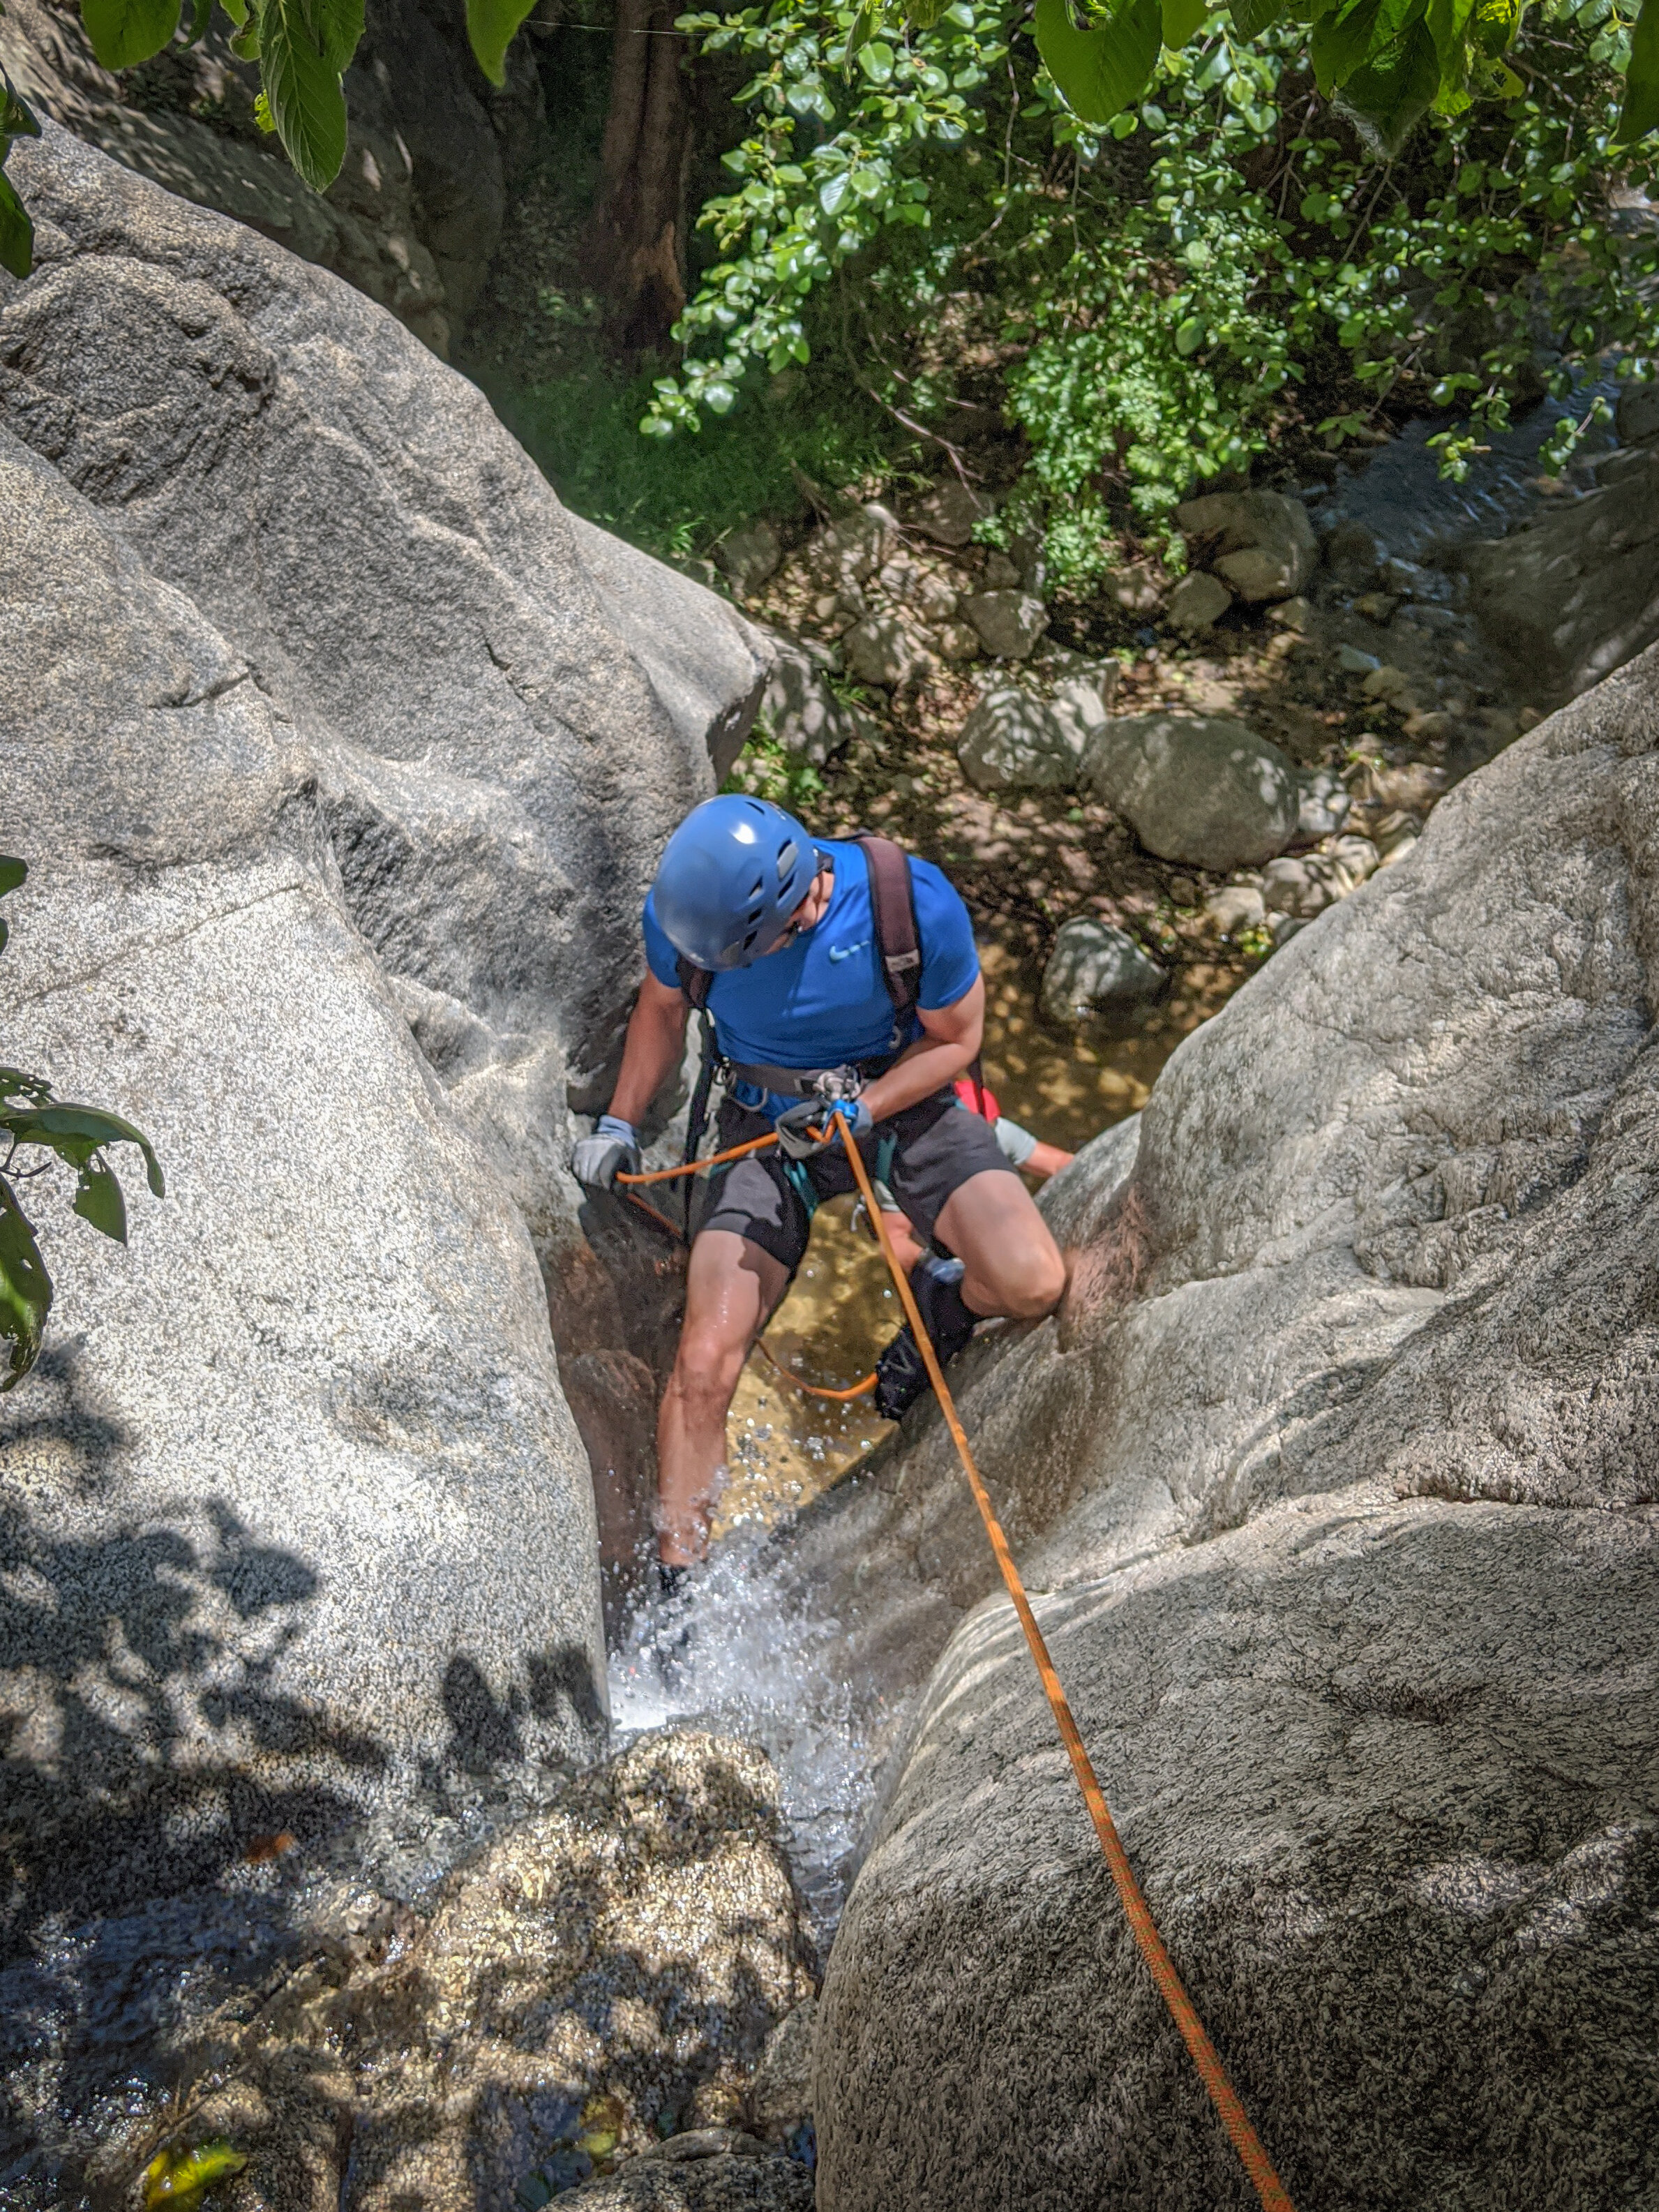 Our Beginner's Guide to Canyoneering in So. California